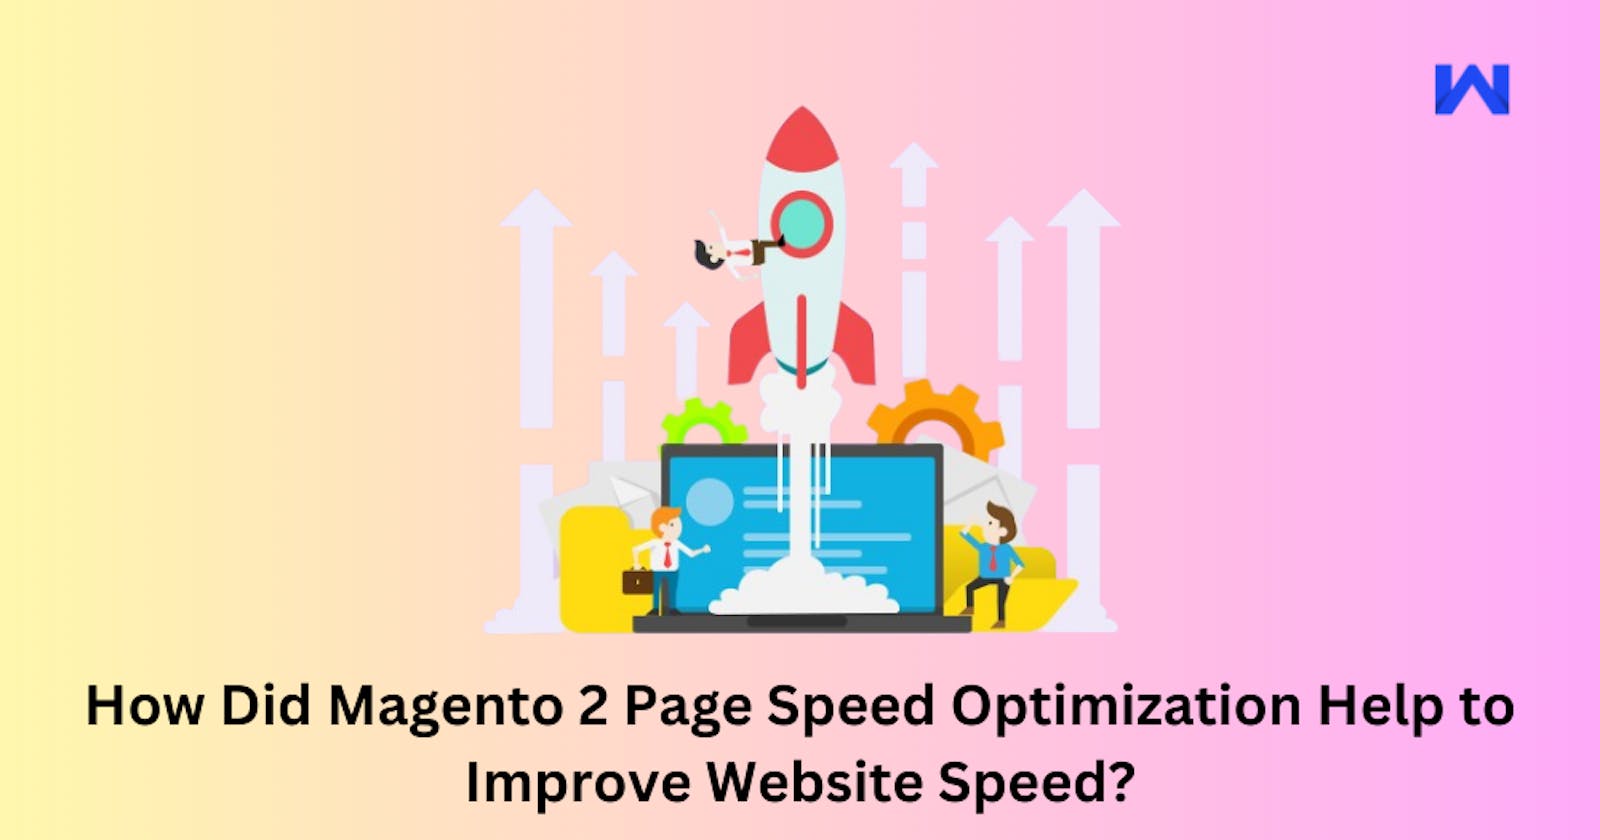 How Did Magento 2 Page Speed Optimization Help to Improve Website Speed?